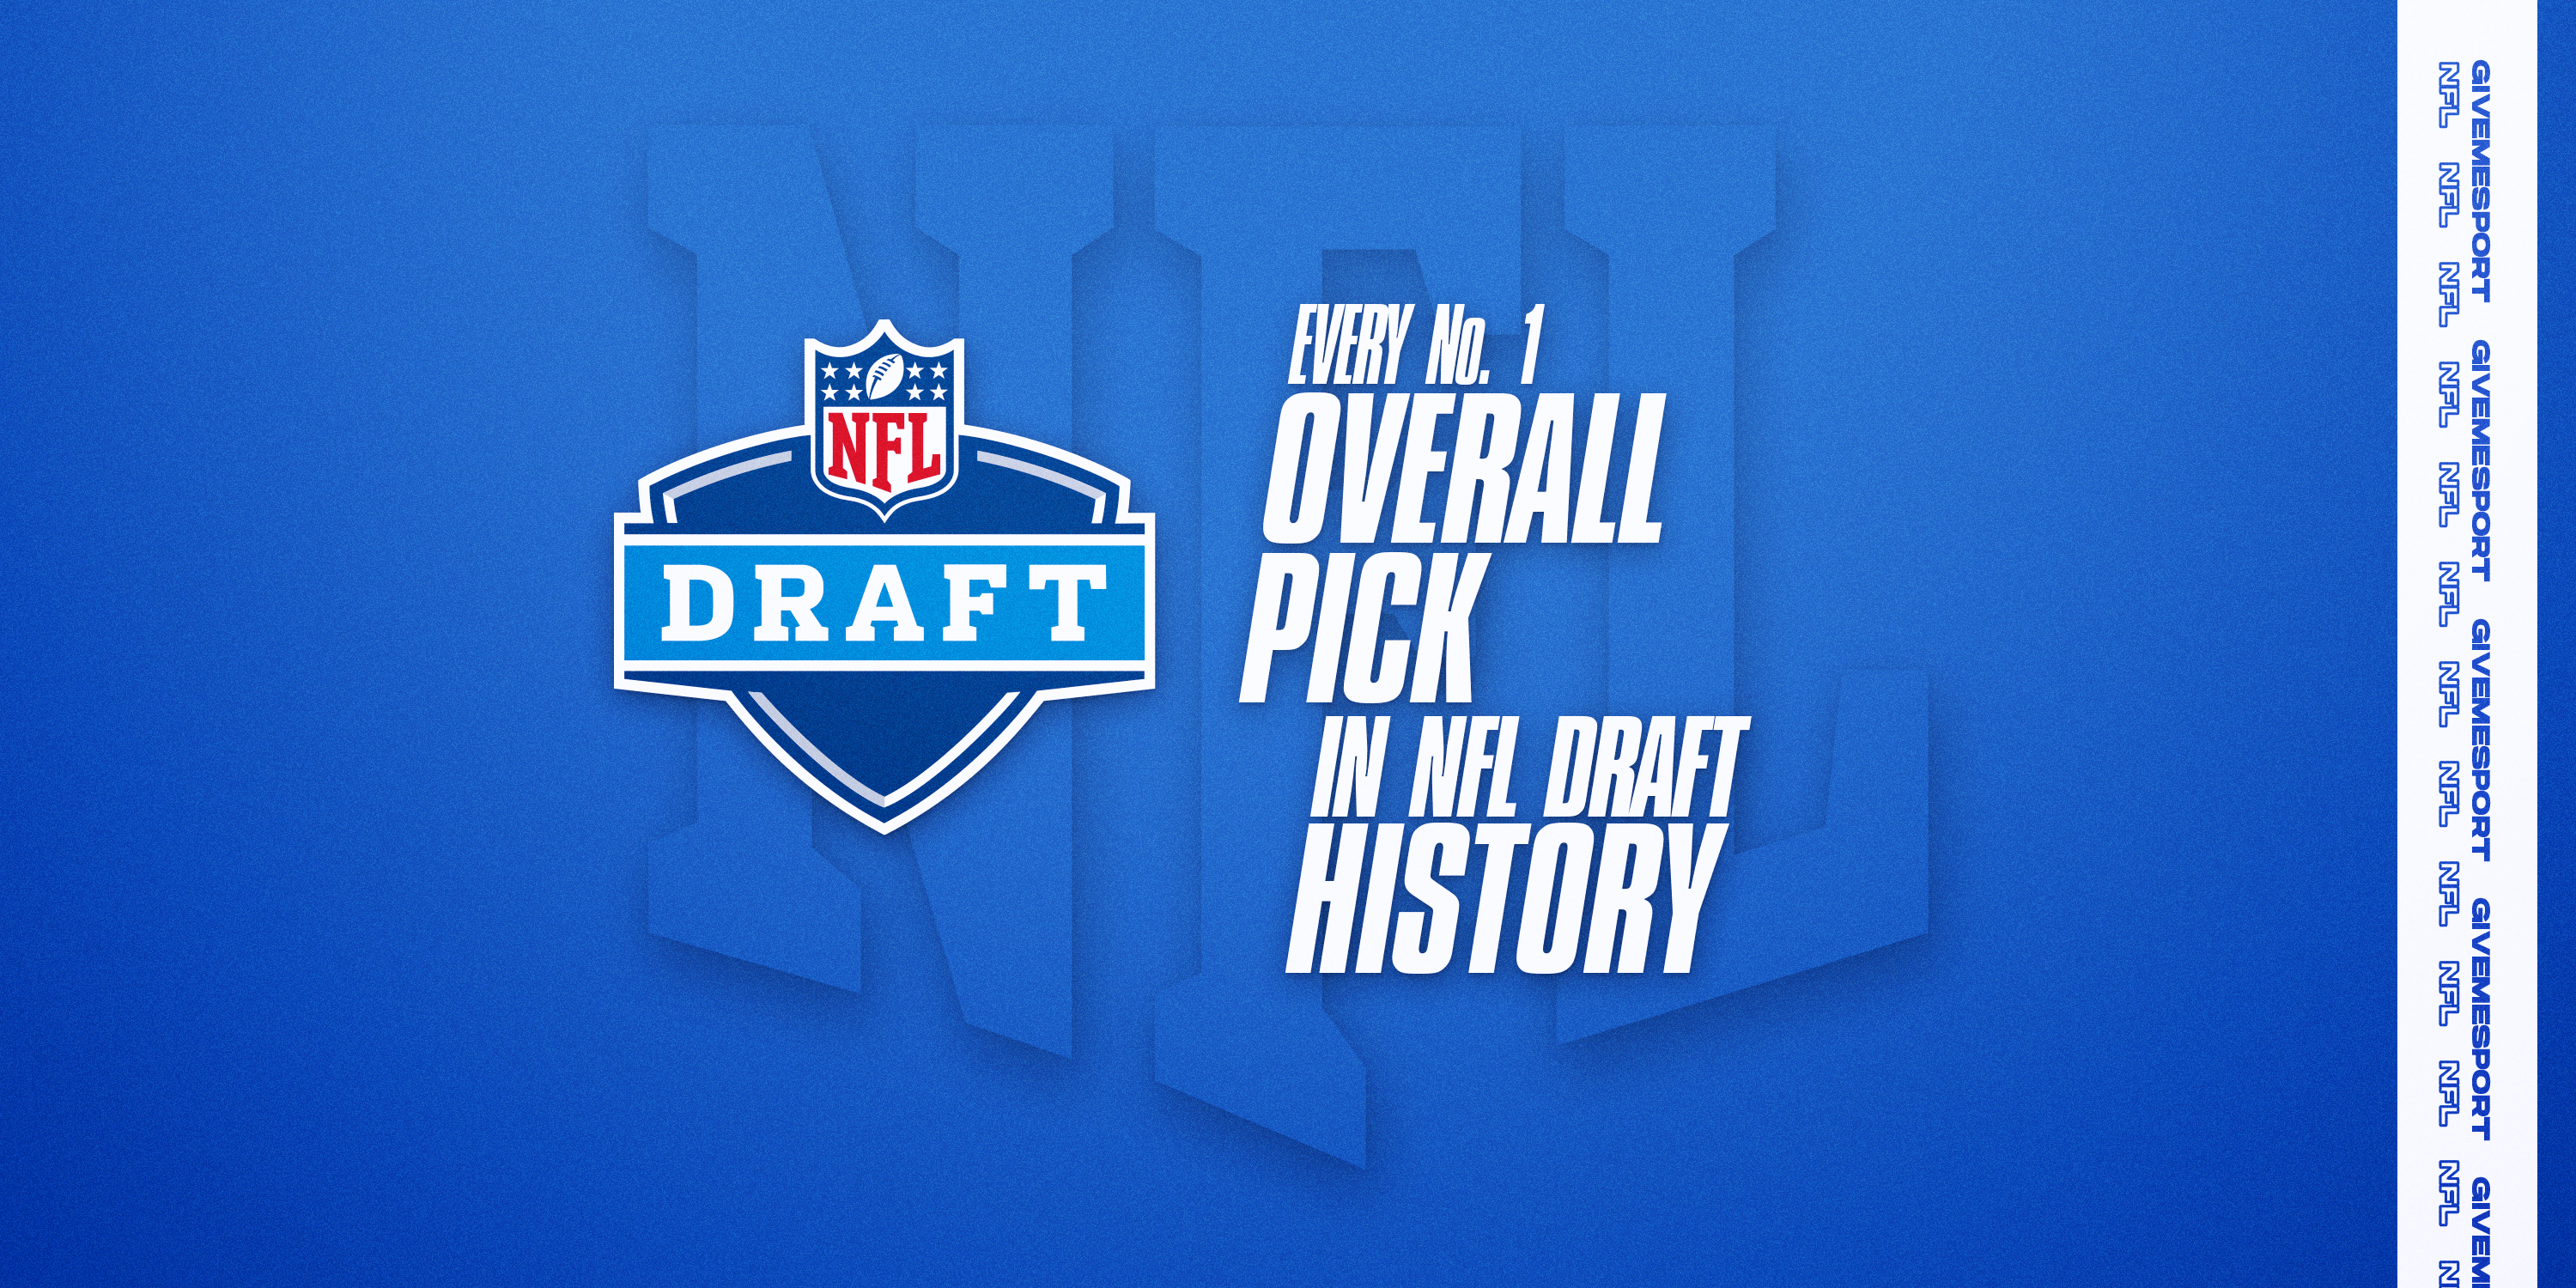 Every No. 1 Overall Pick NFL Draft History